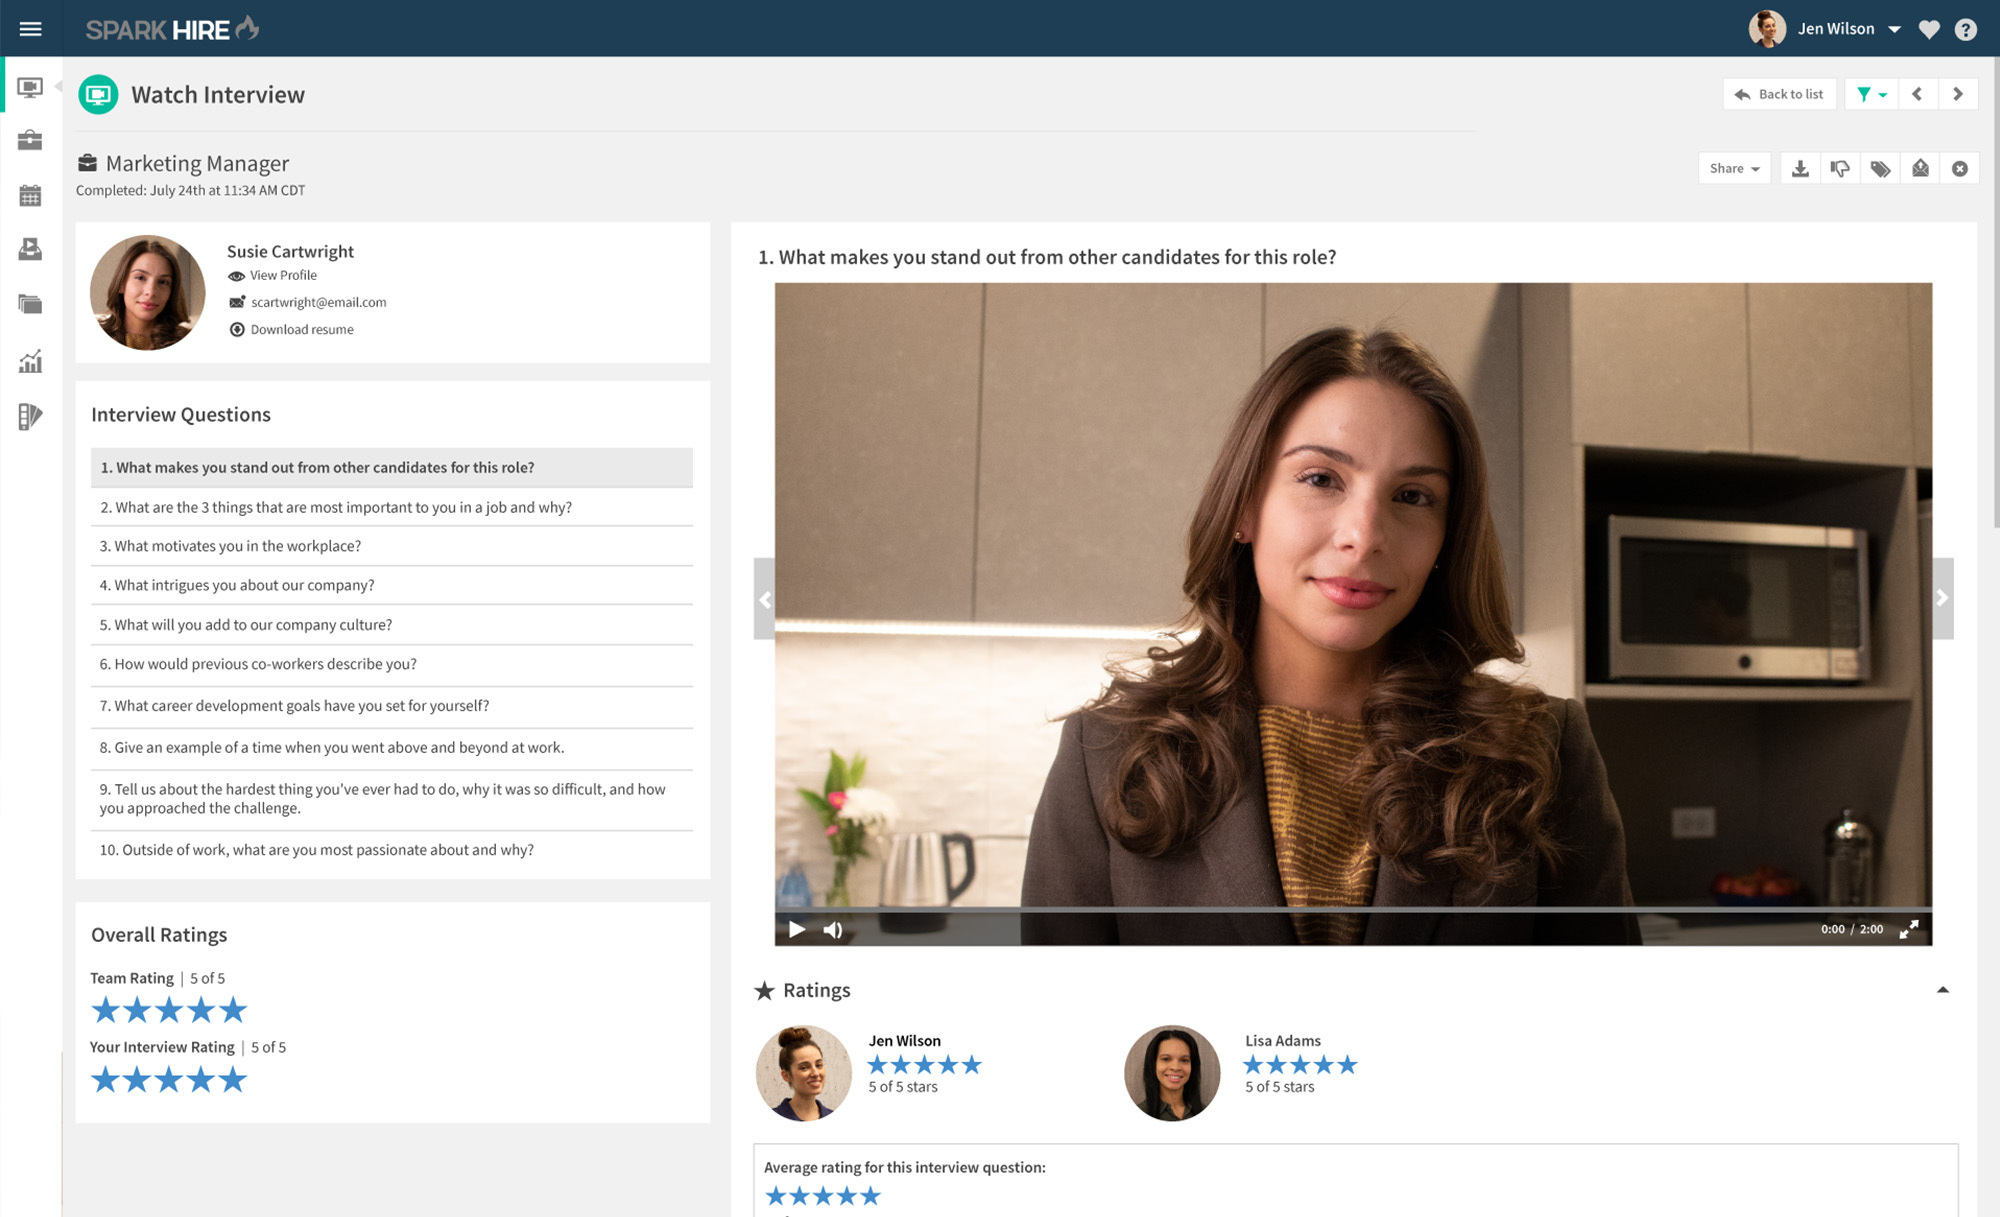 Spark Hire offers a video call view where you can see the candidate as well as interview questions and ratings. Image via Spark Hire.